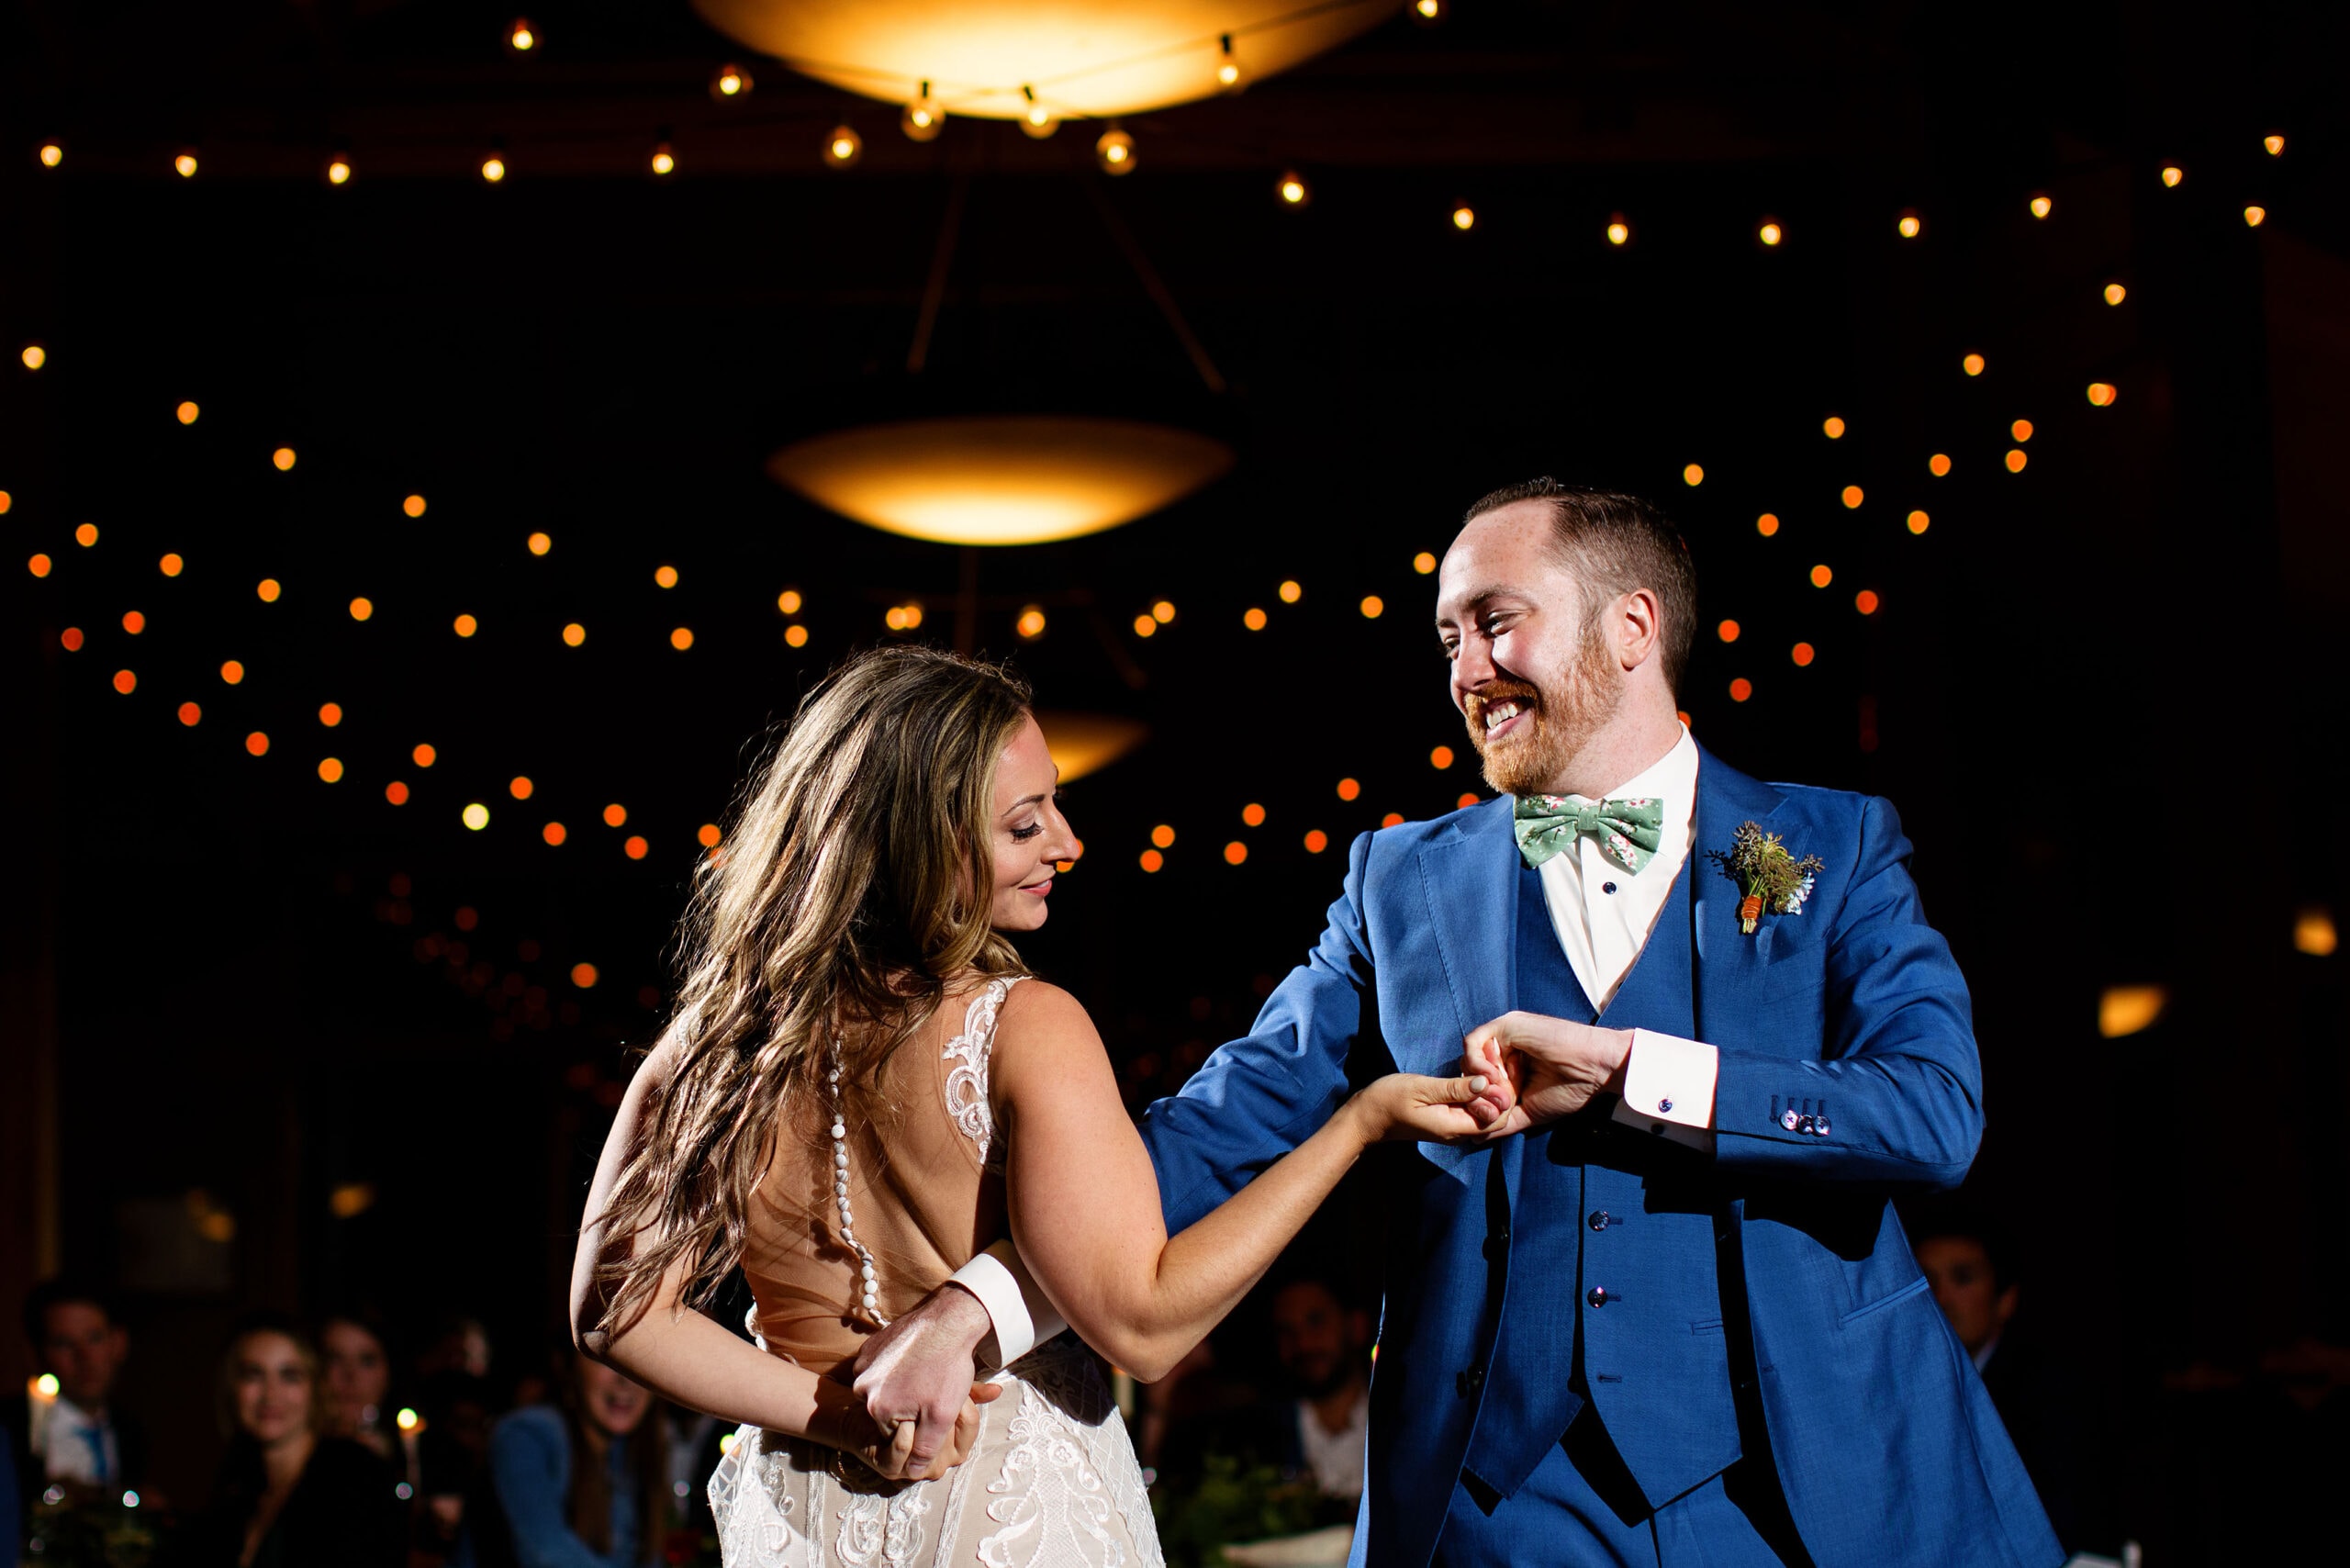 Caitlin and Gavin share their first dance together